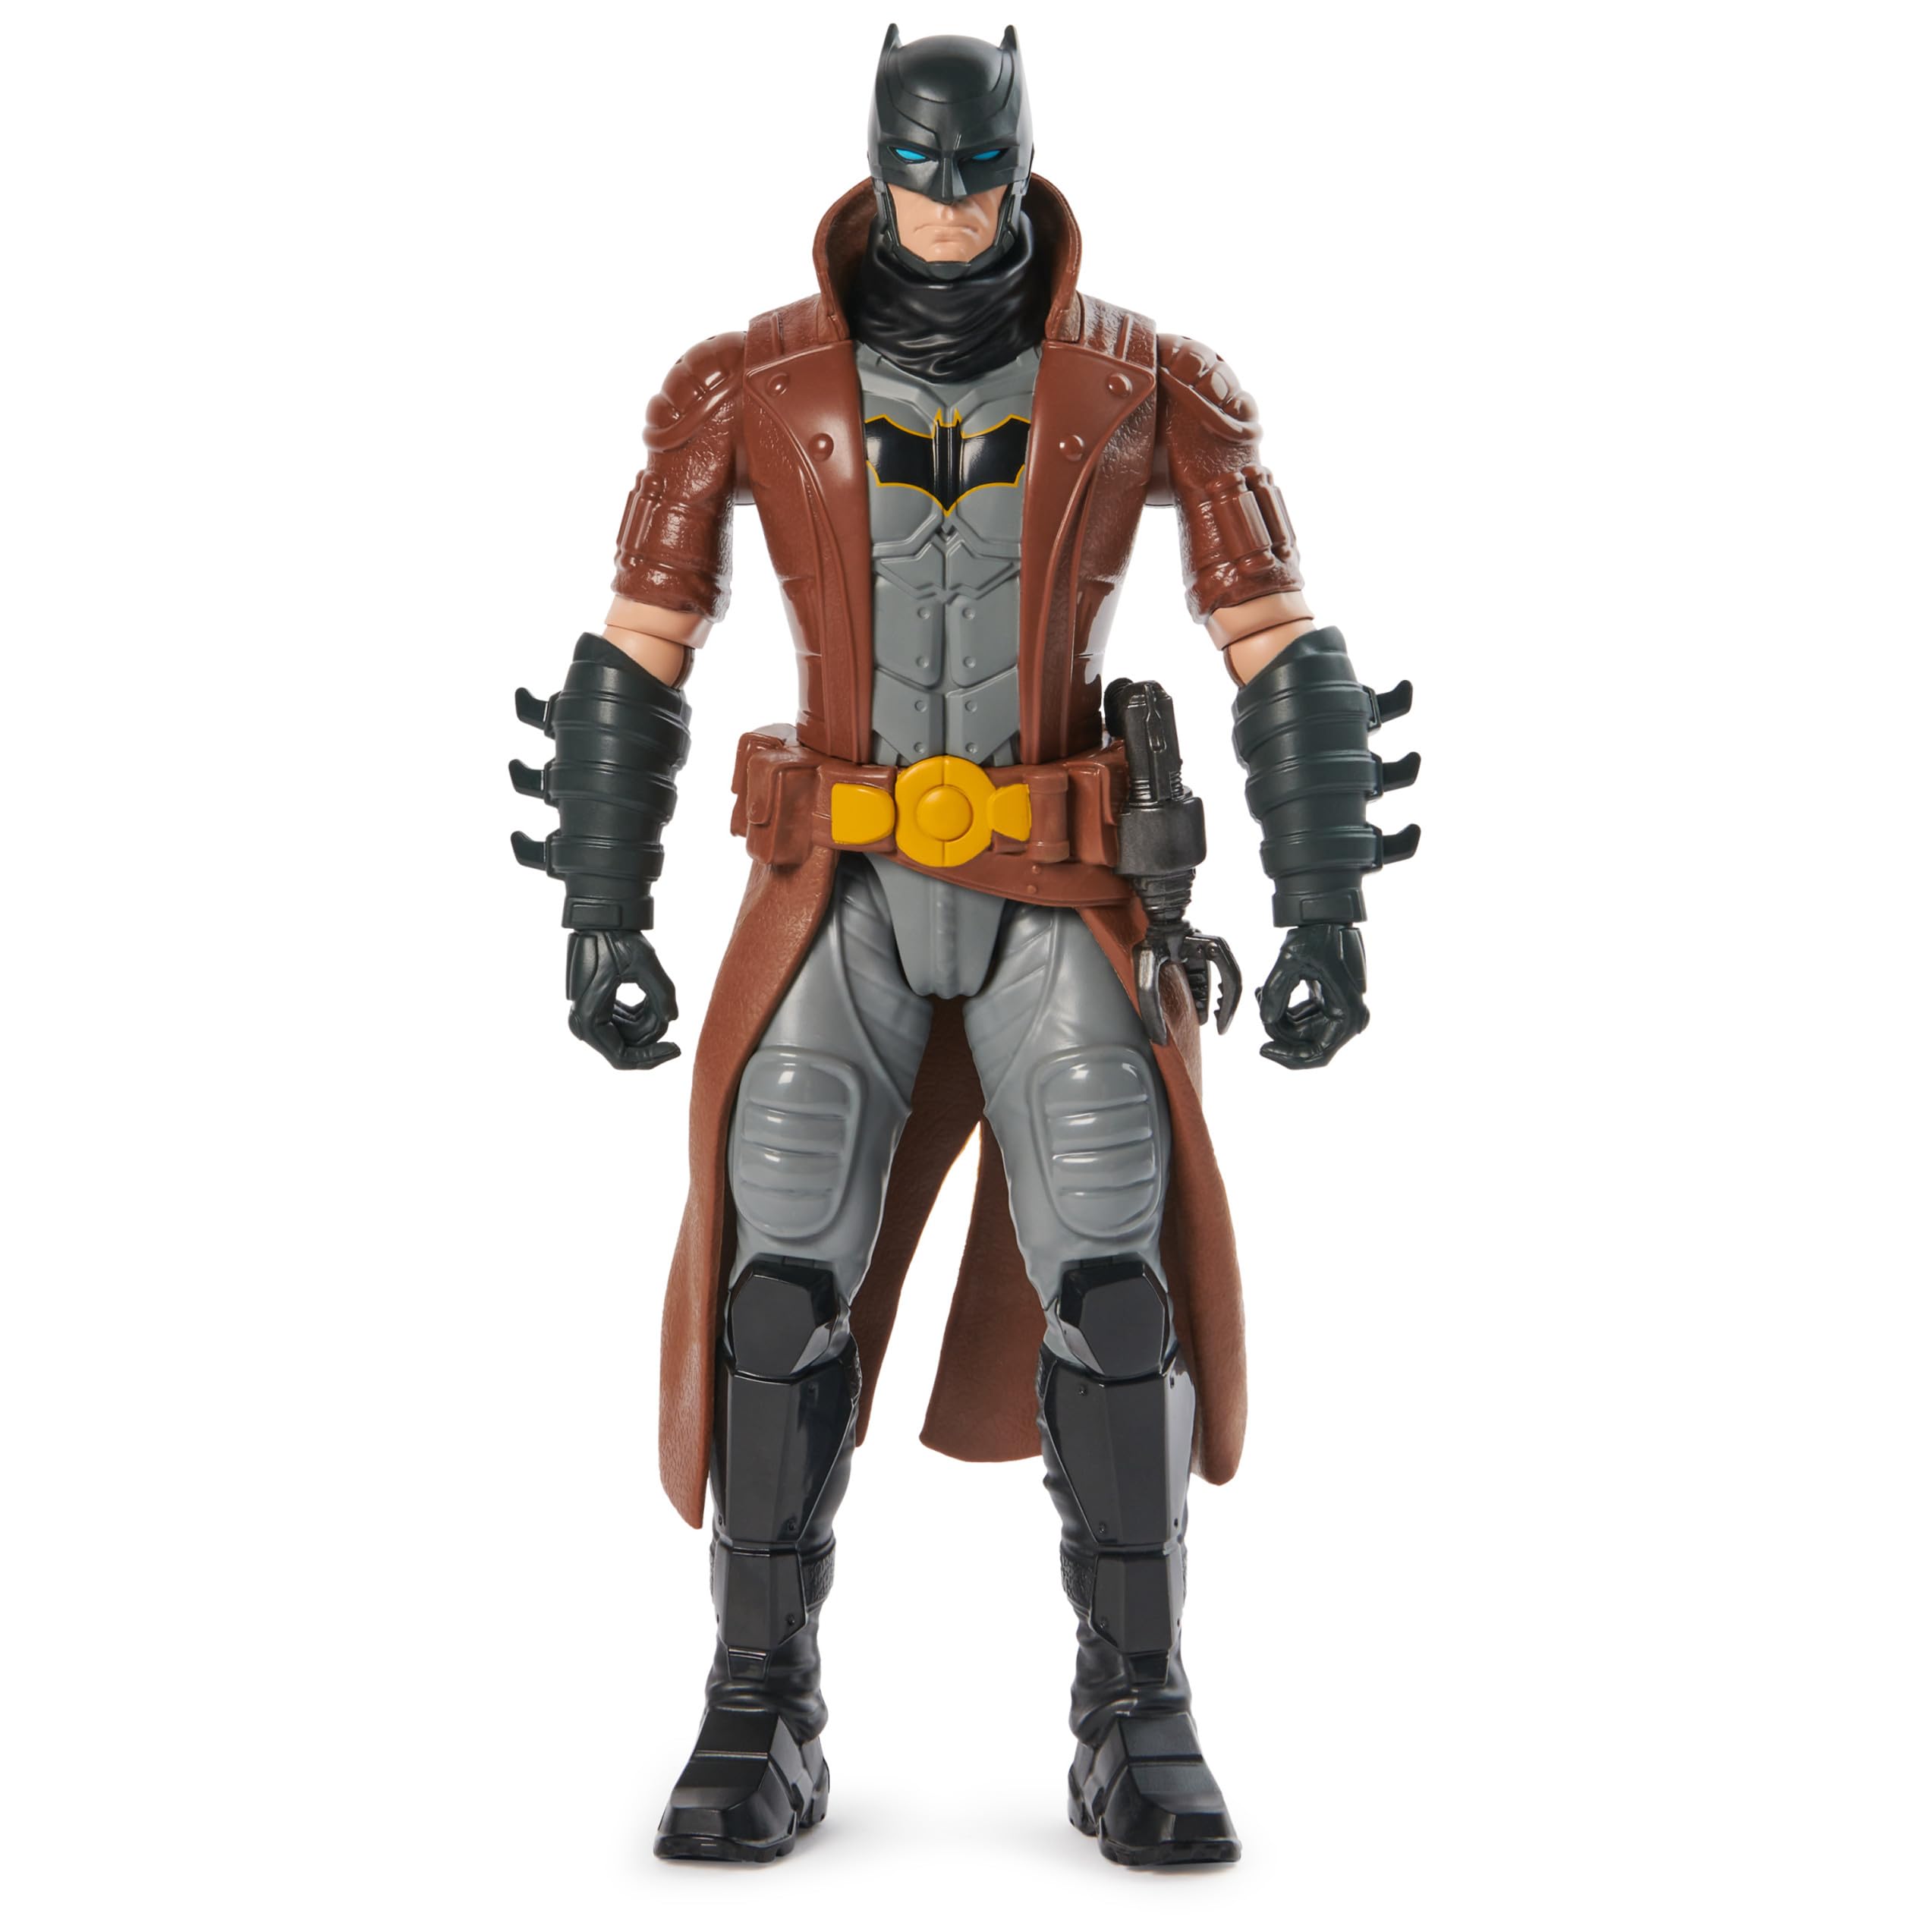 12" DC Comics Batman Action Figure (Brown) $6.08 + Free Shipping w/ Prime or on orders over $35